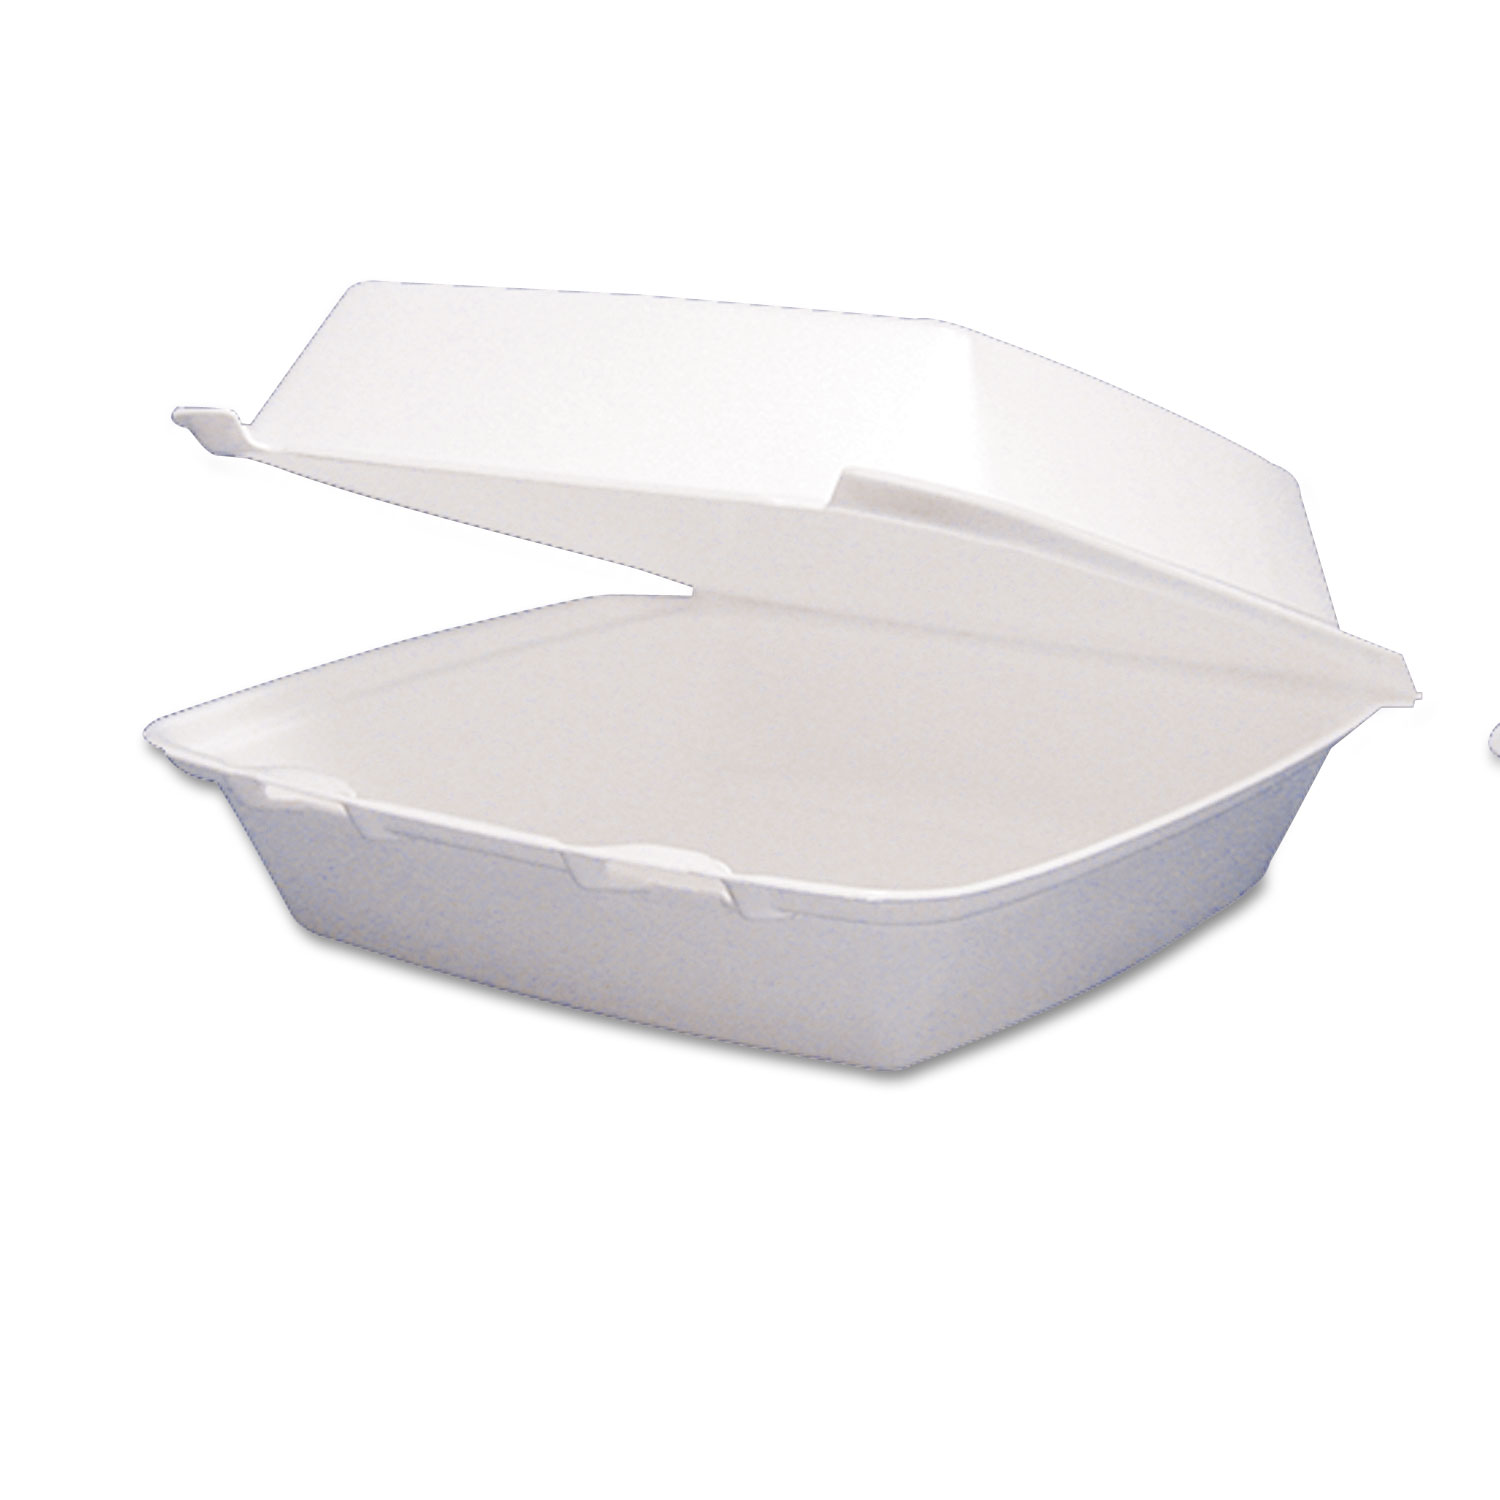  Dart 95HT1R Carryout Food Container, Foam Hinged 1-Comp, 9 1/2 x 9 1/4 x 3, 200/Carton (DCC95HT1R) 